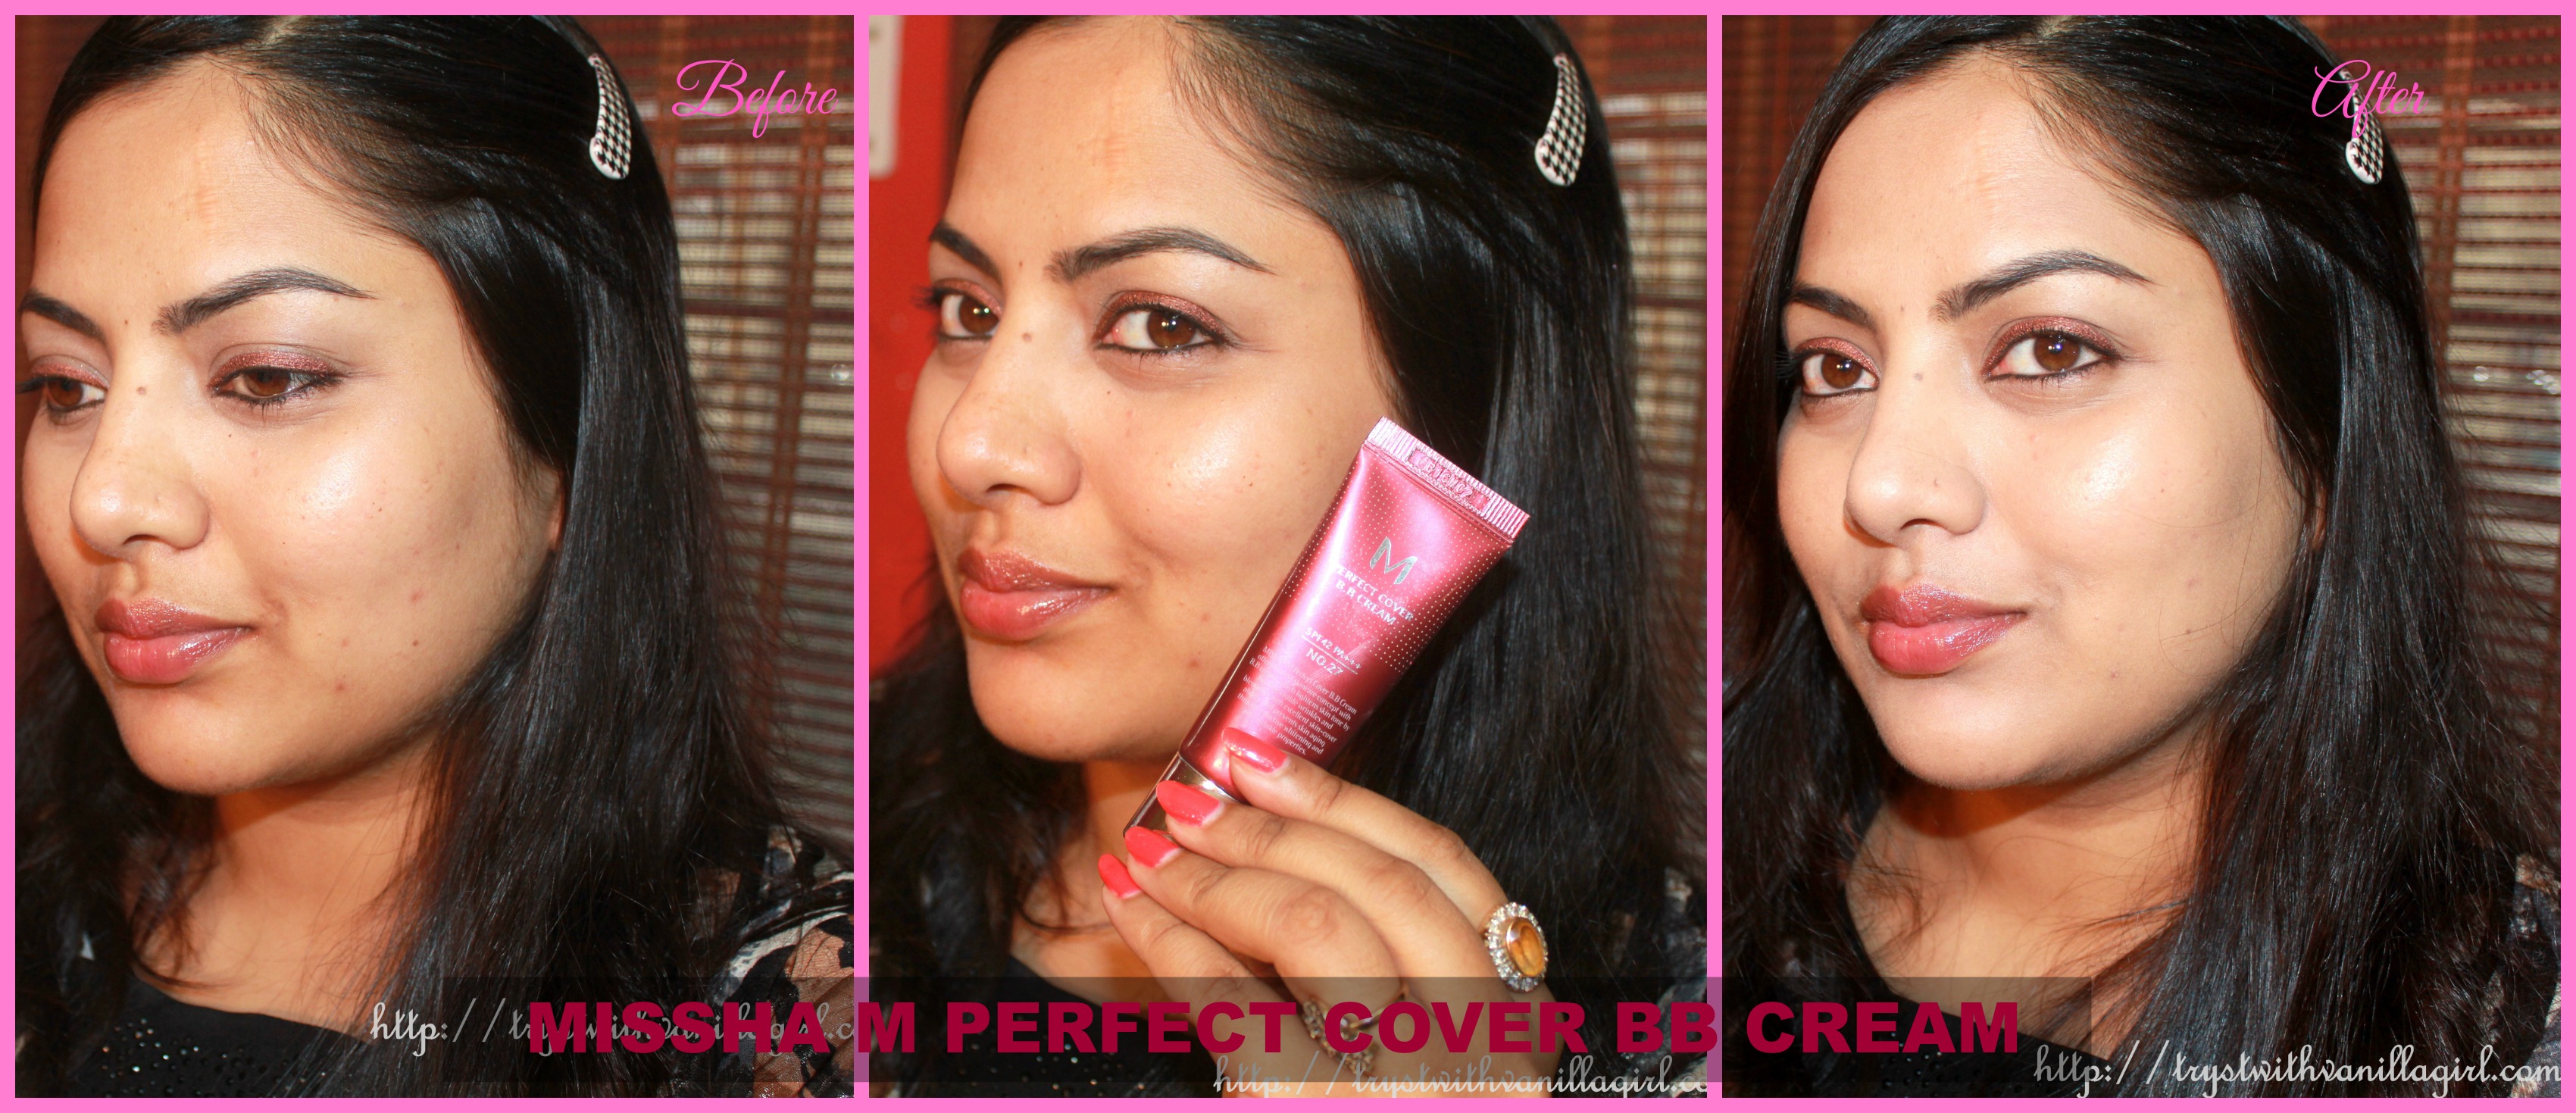 Missha M Perfect Cover BB Cream Review,Swatch,Photos,Demo